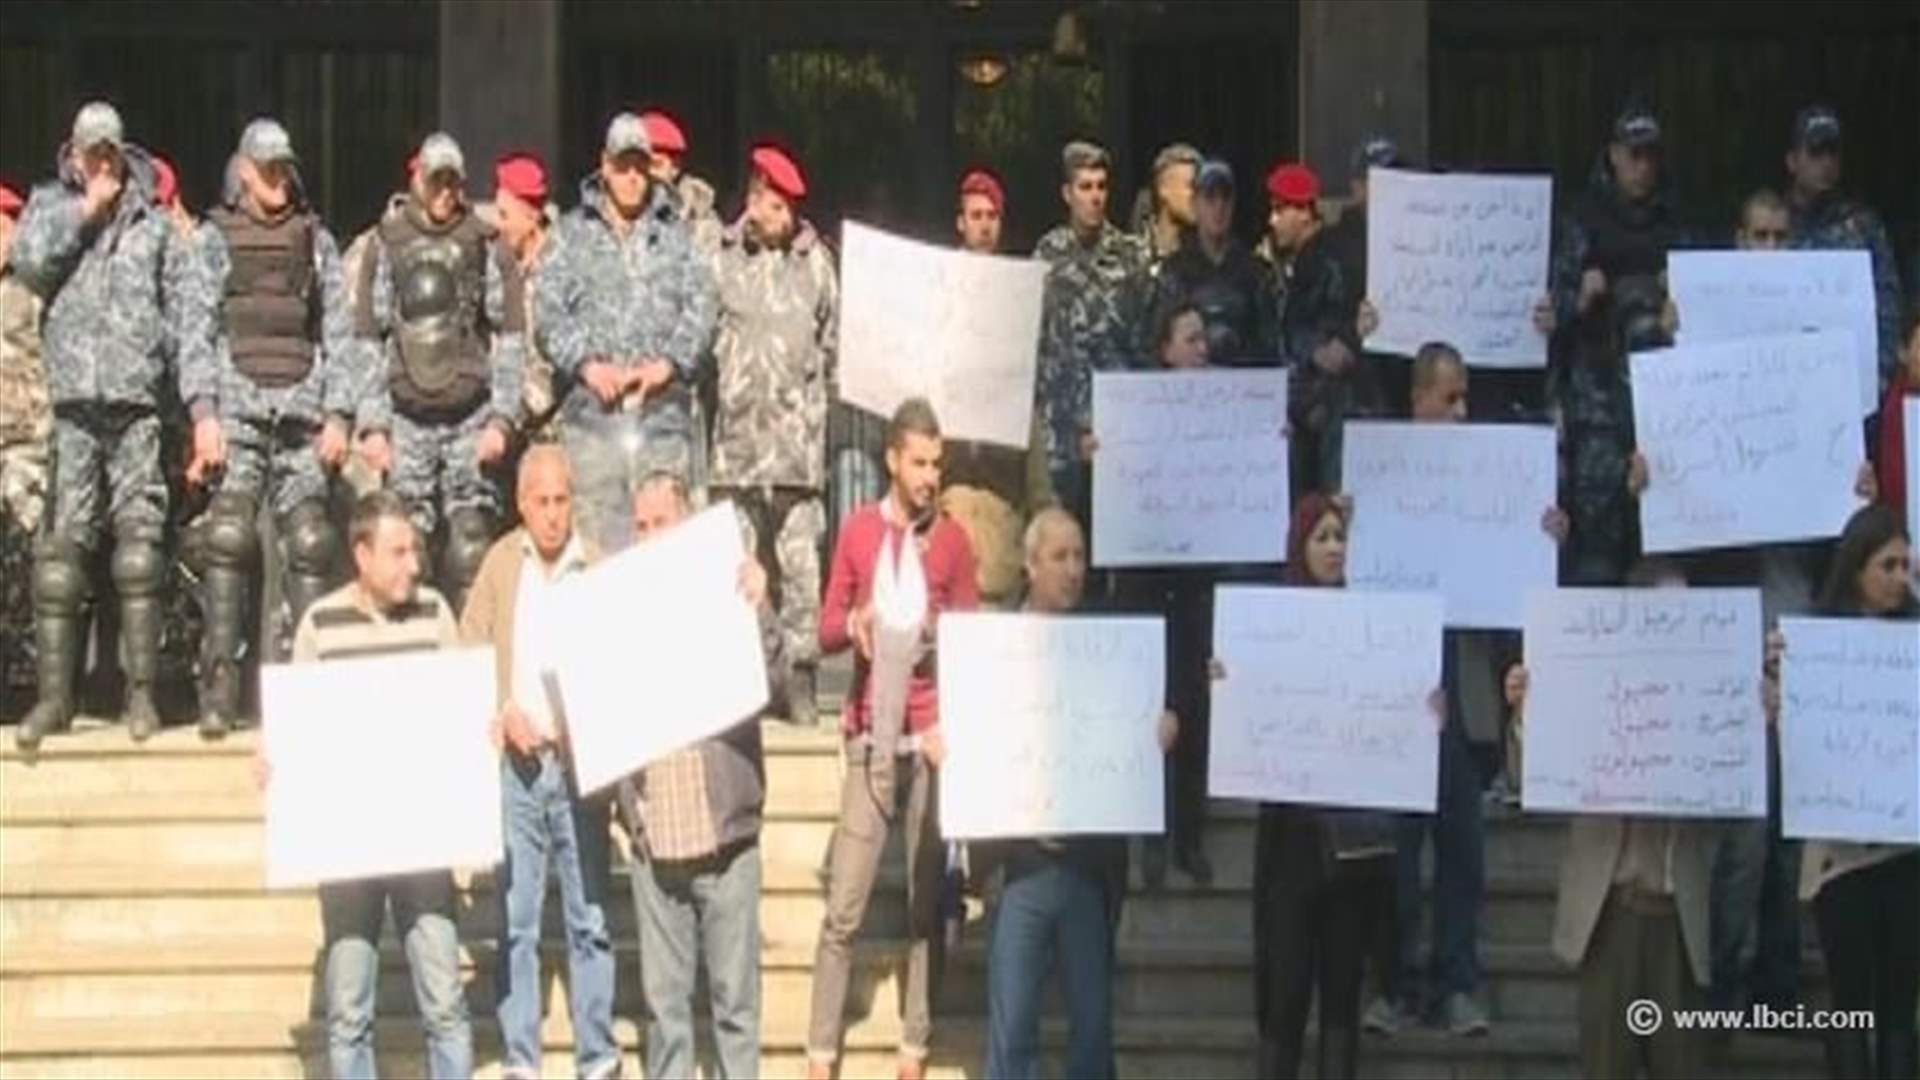 REPORT: “We Want Accountability” stages protest outside Central Inspection Building